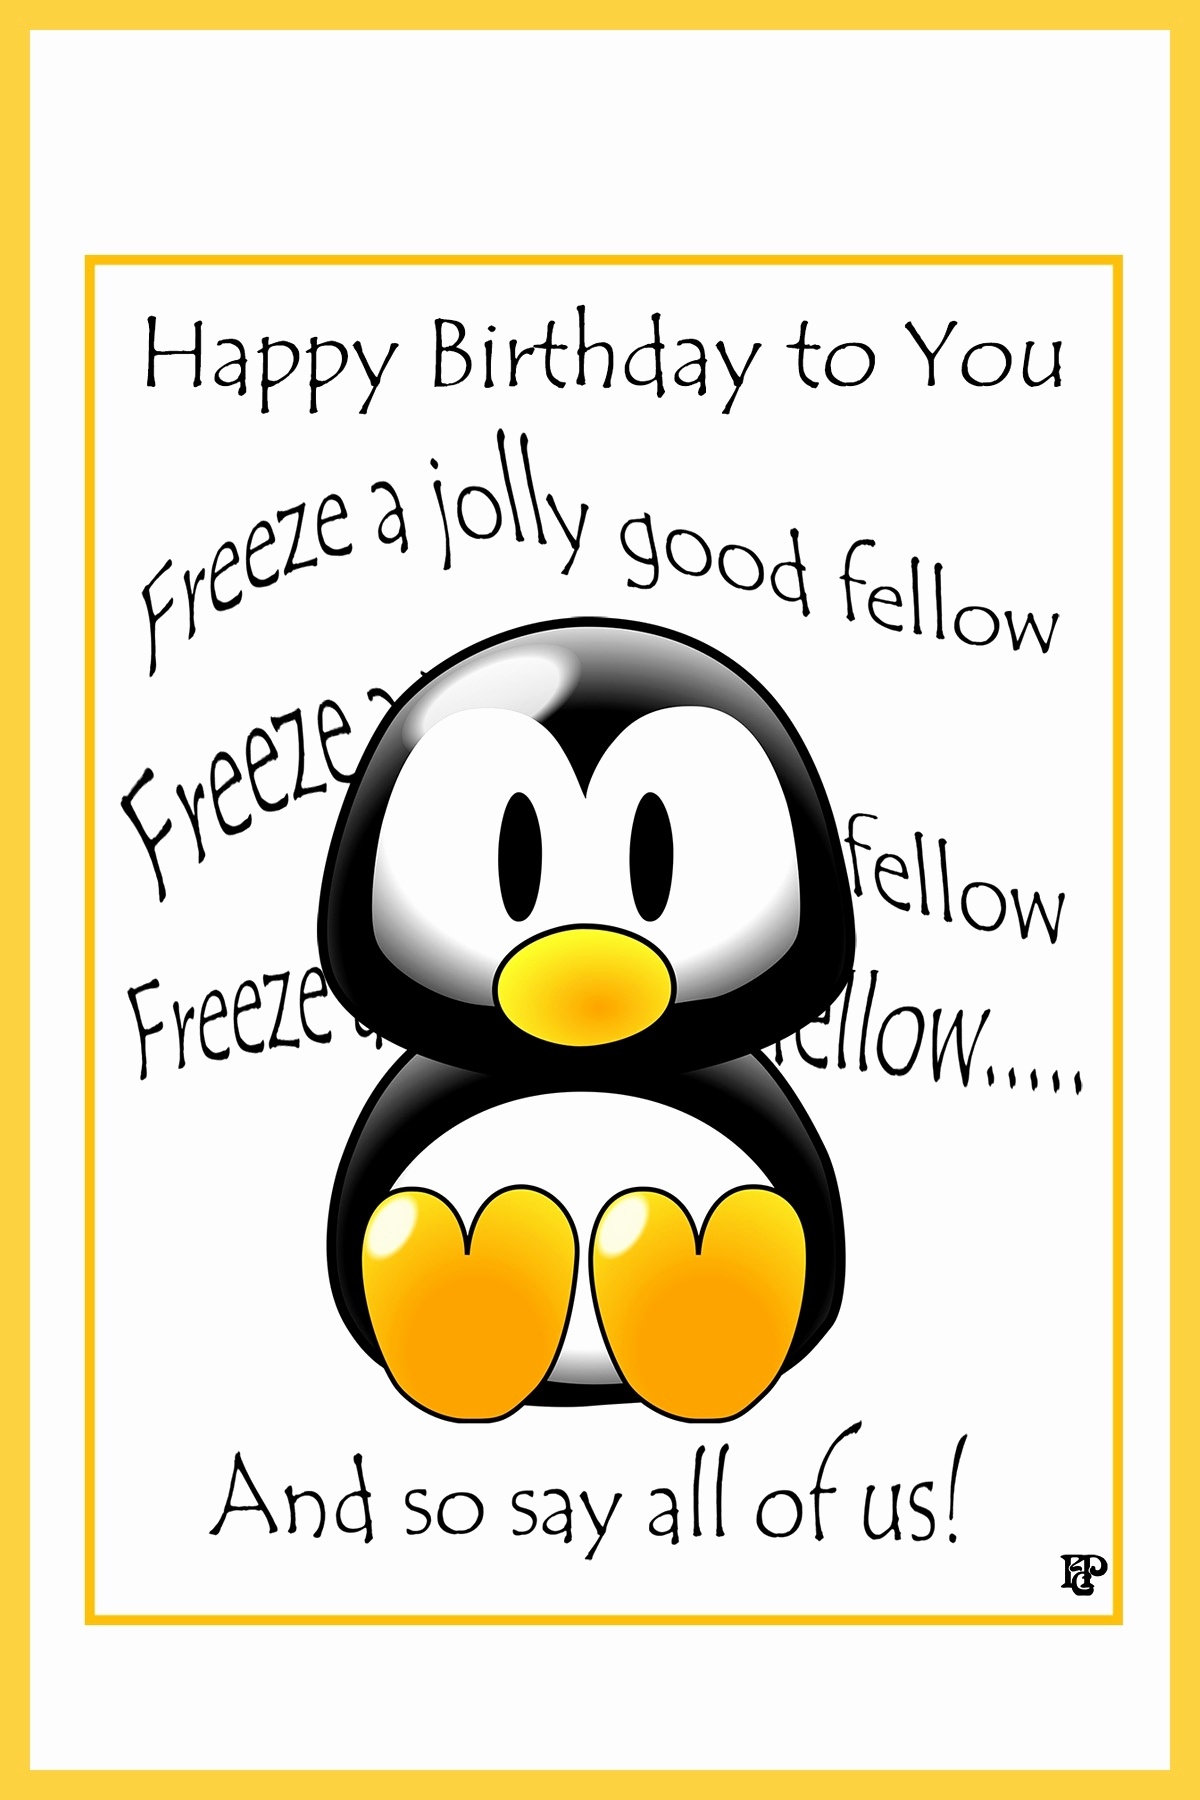 Free Printable Funny Photo Birthday Cards Unique Funny Birthday - Free Printable Funny Birthday Cards For Coworkers